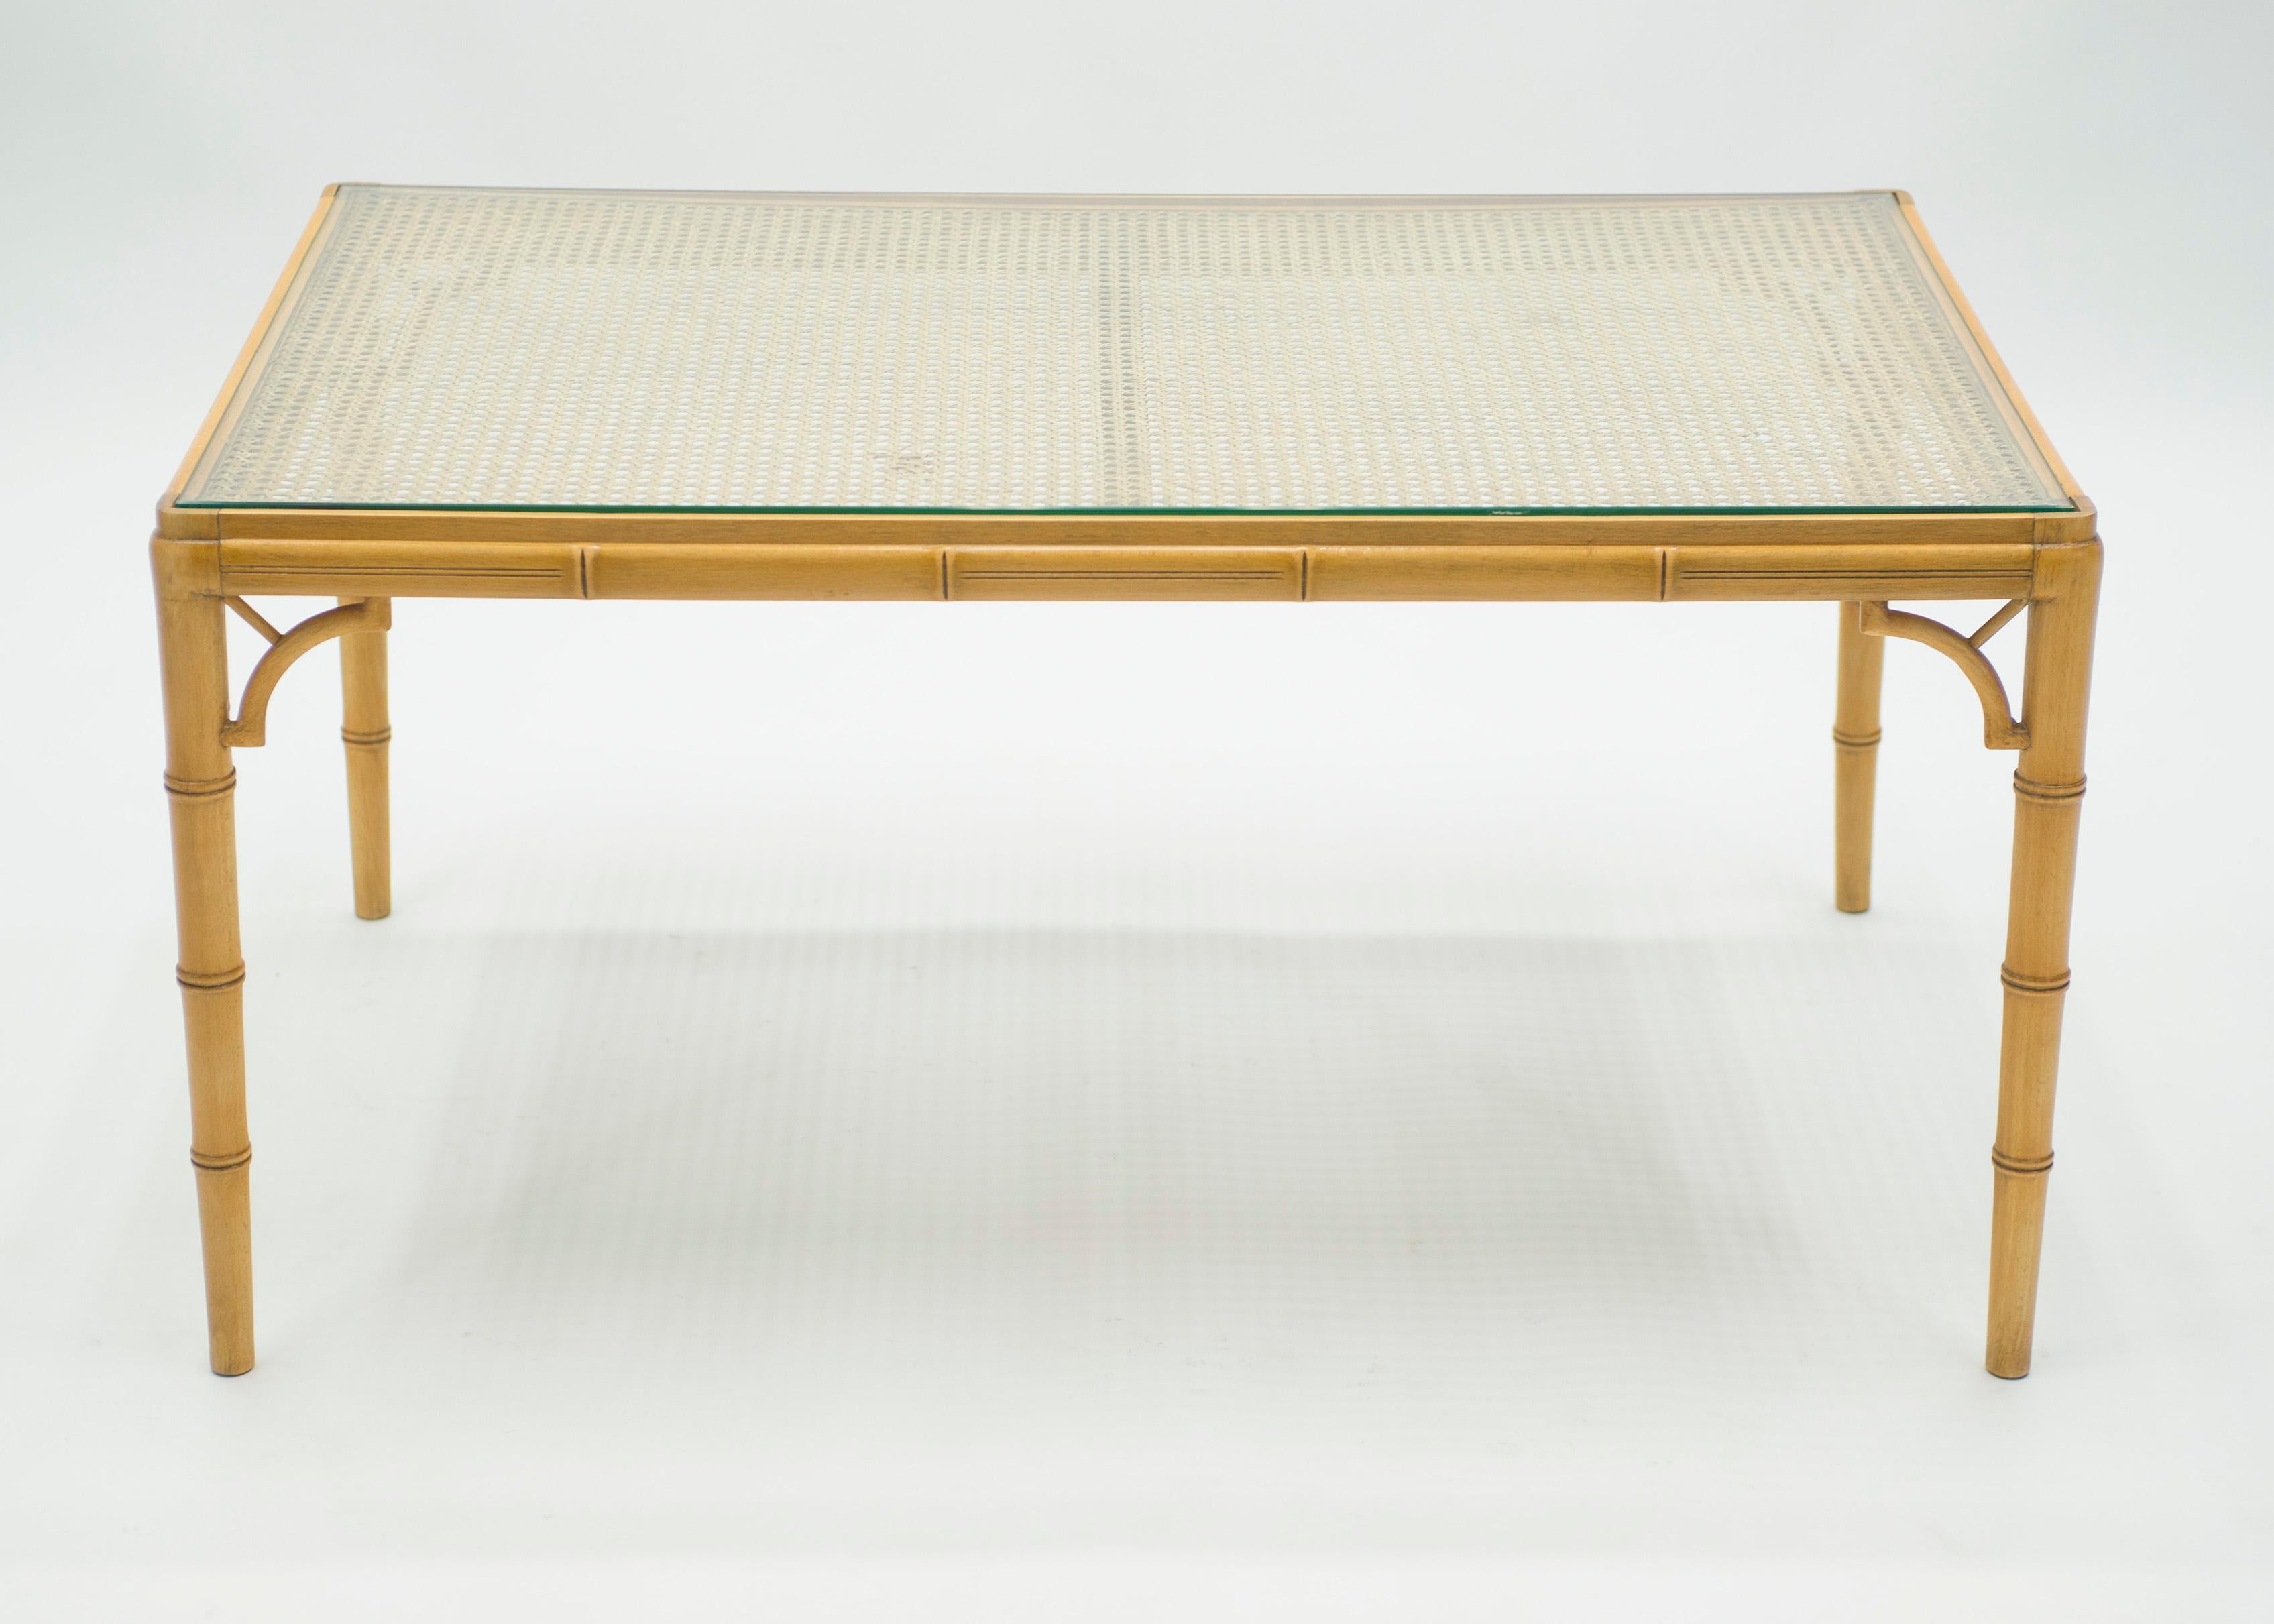 This bamboo coffee table from the Mid-Century Modern French Riviera period is bursting with nostalgia. A light golden bamboo structure, cane top with protective glass would feel right at home in a stylish vacation house by the water. The soothing